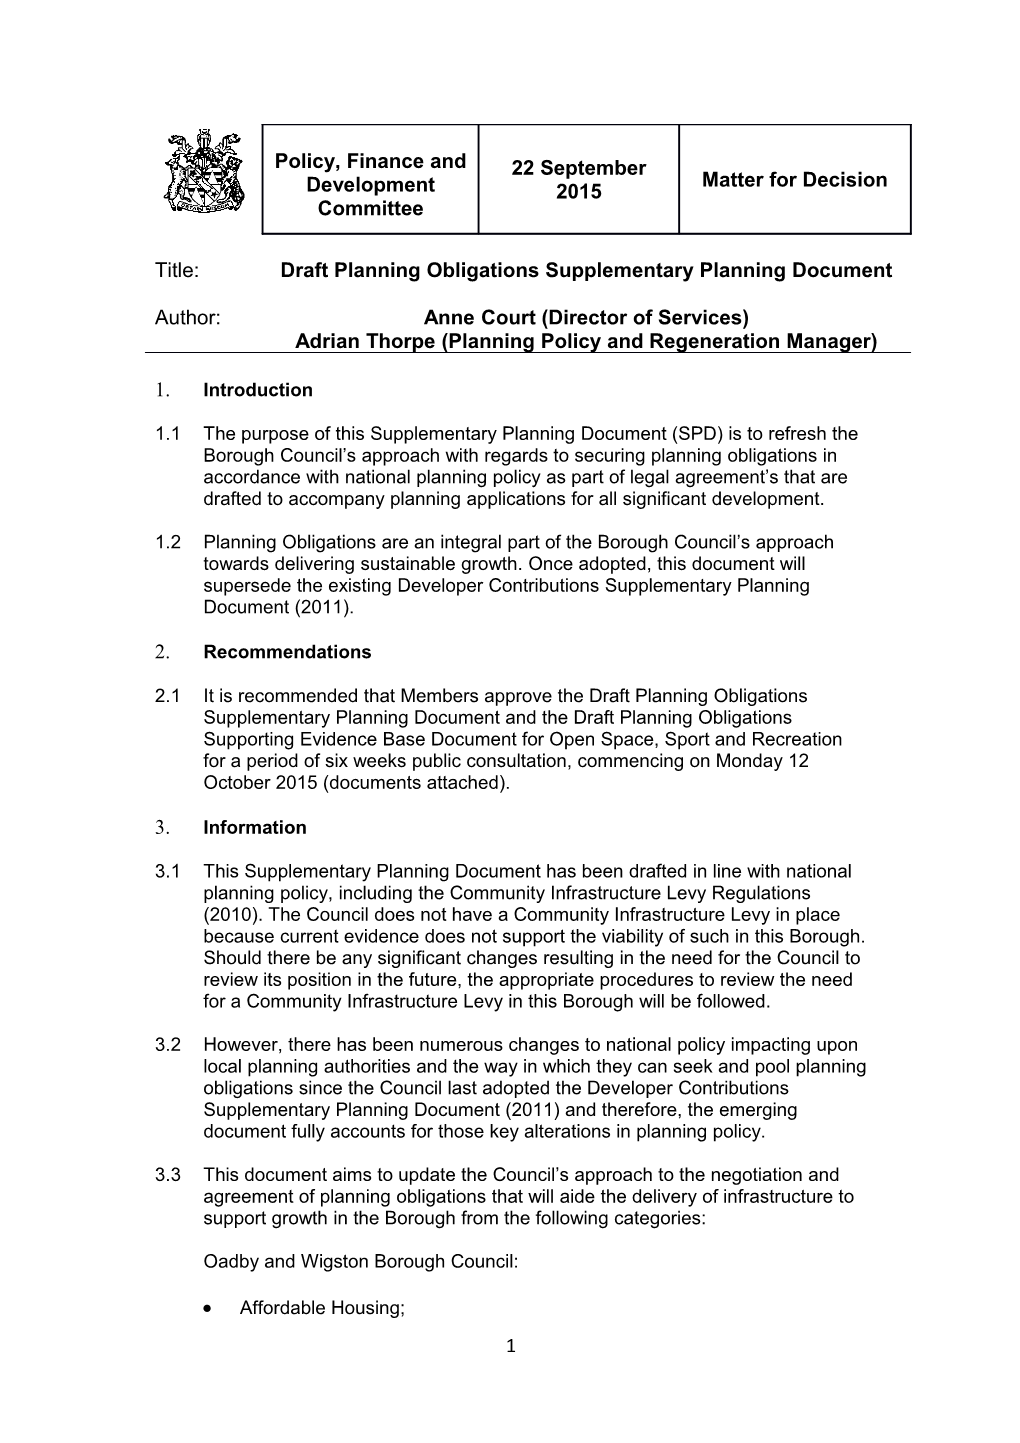 1.1The Purpose of This Supplementary Planning Document (SPD) Is to Refresh the Borough